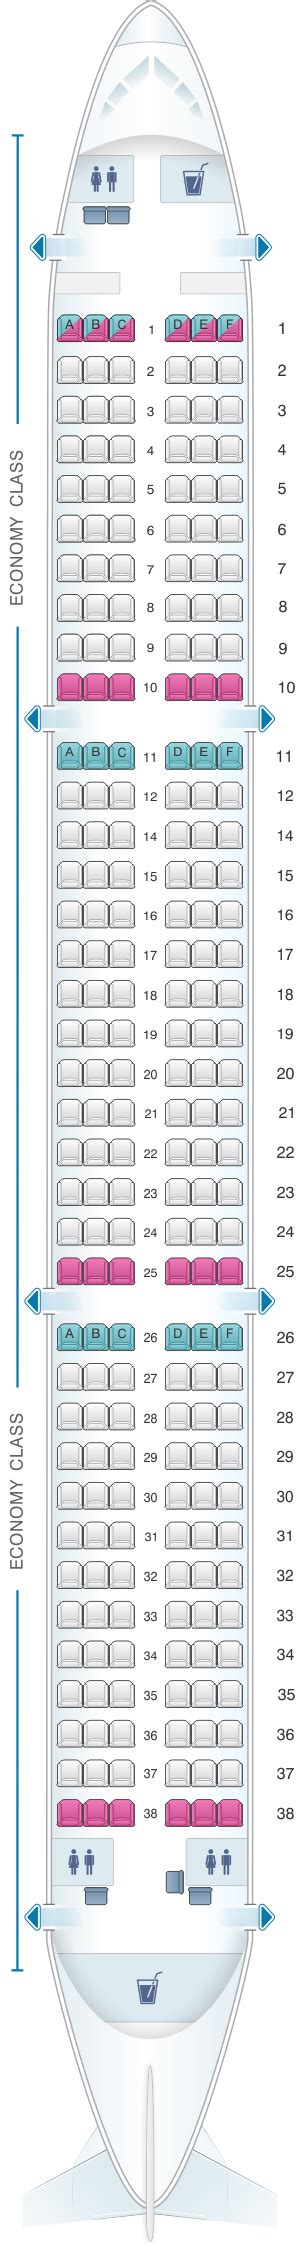 Seat Map Freebird Airlines Airbus A321 Airplane Seats Best Airplane